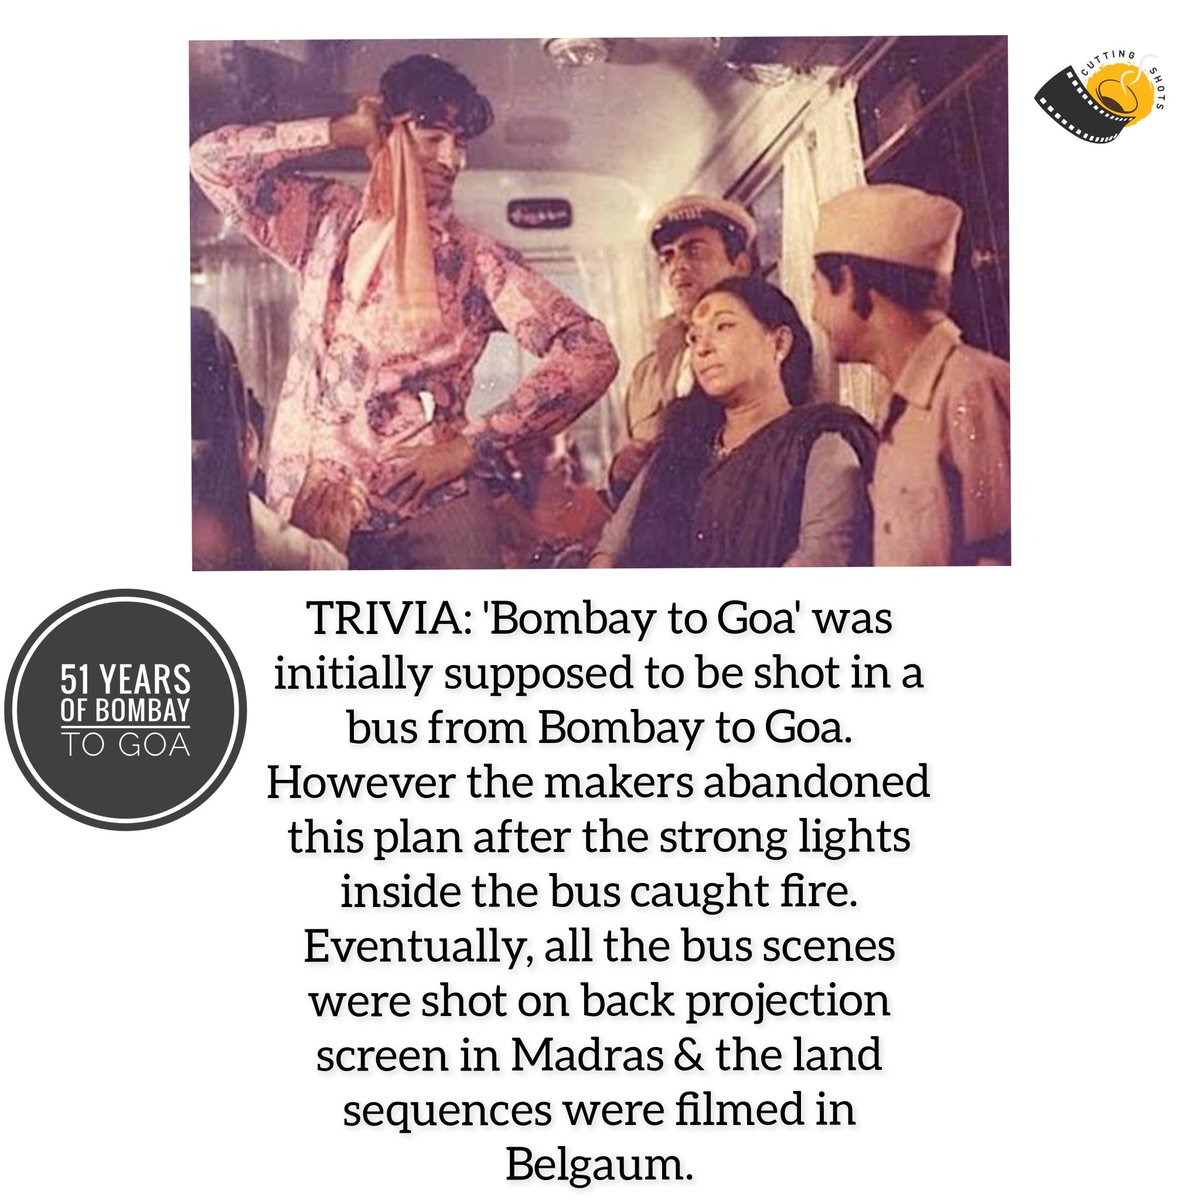 To celebrate 51 years of @amitabhbachchan-Mehmood starrer 'Bombay To Goa' today, we bring you an intriguing trivia about this comic caper.

#bombaytogoa #51yearsofbombaytogoa #amitabhbachchan #mehmood #arunairani #shatrughansinha #lalitapawar #bollywood #cuttingshots